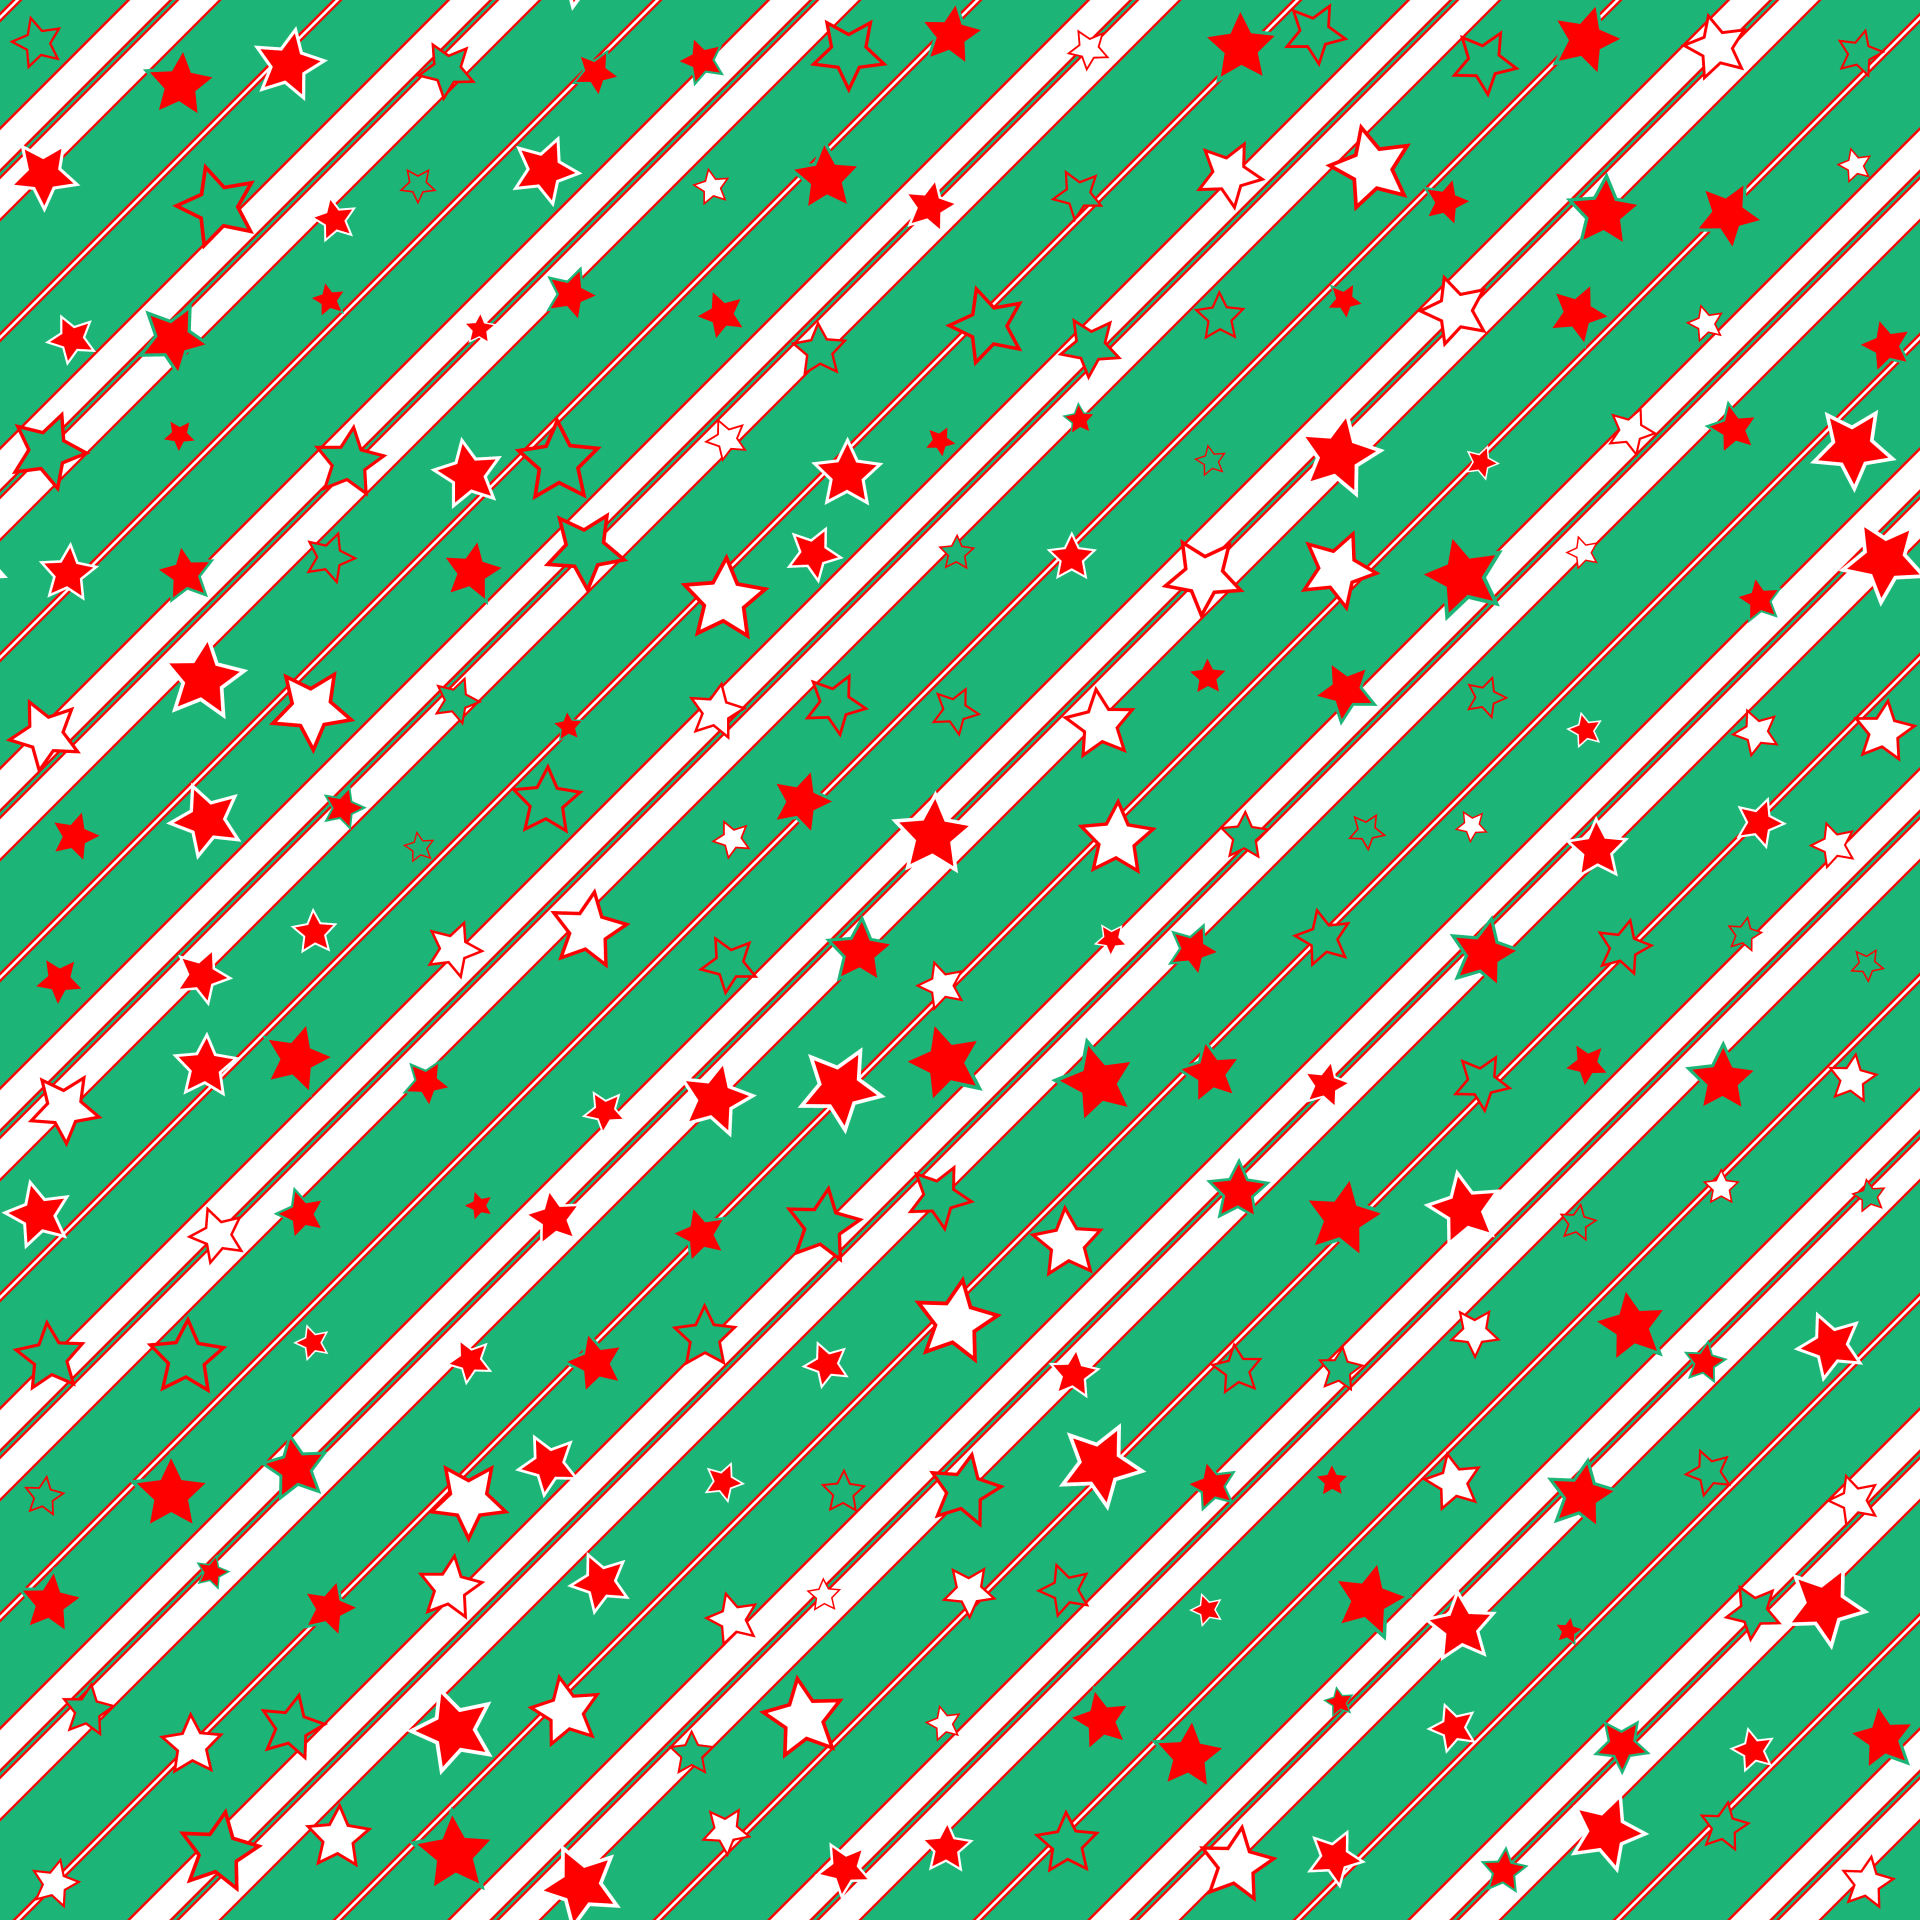 Christmas paper stars pattern texture background gifts colorful colors seamless seamless tiling matching website print template holidays family Decorative stripe seamless creative kids wrapping wrapping paper design